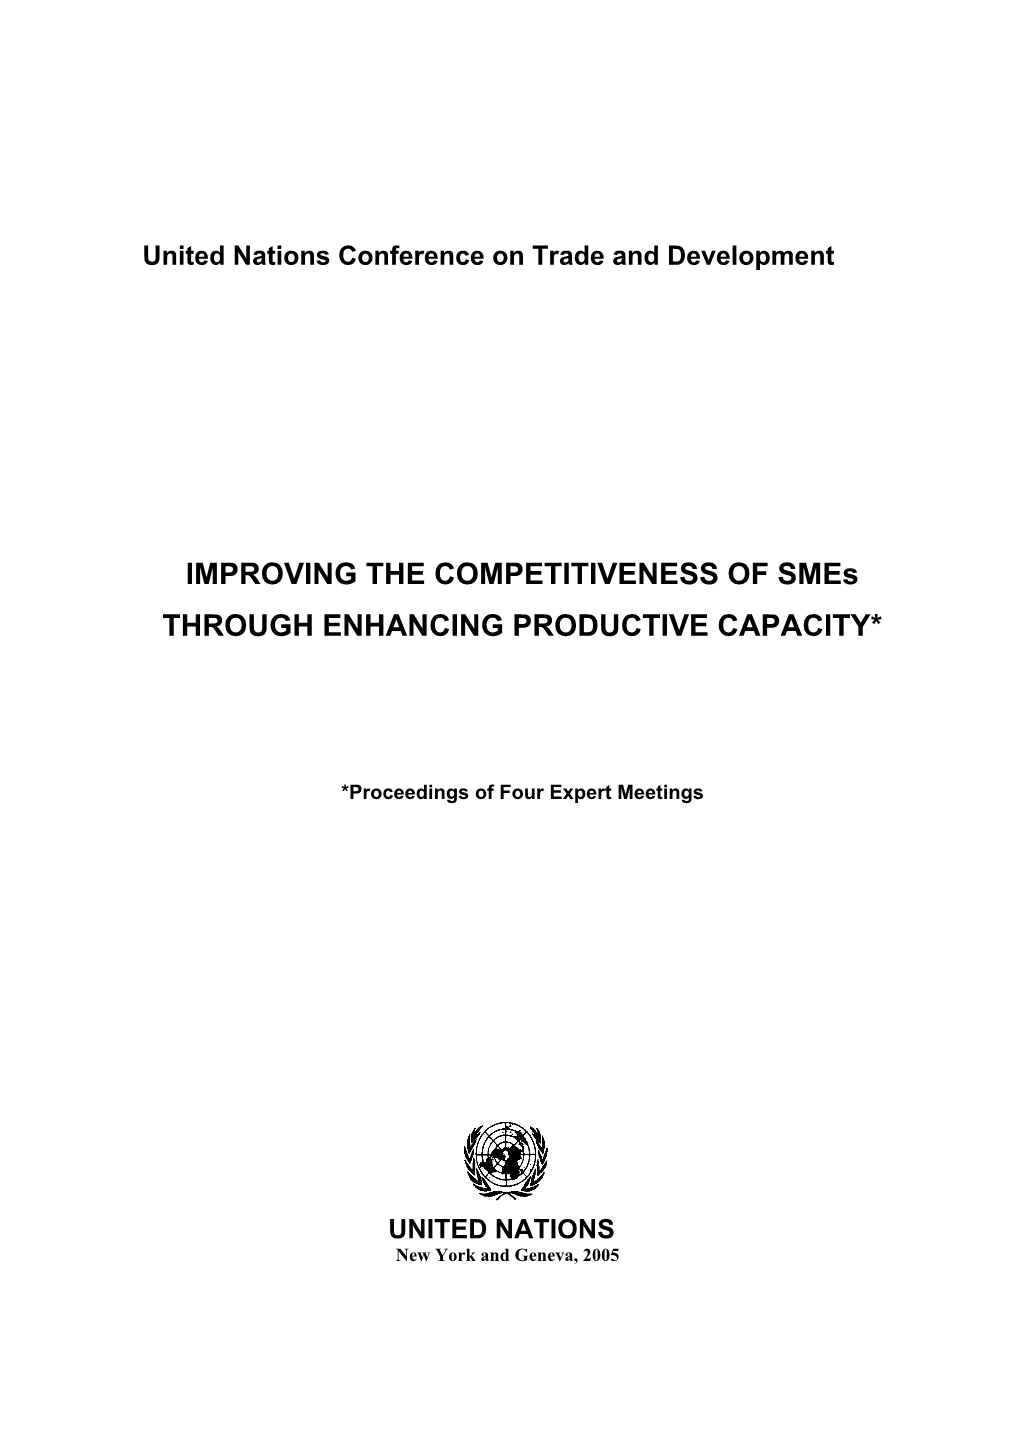 IMPROVING the COMPETITIVENESS of Smes THROUGH ENHANCING PRODUCTIVE CAPACITY*